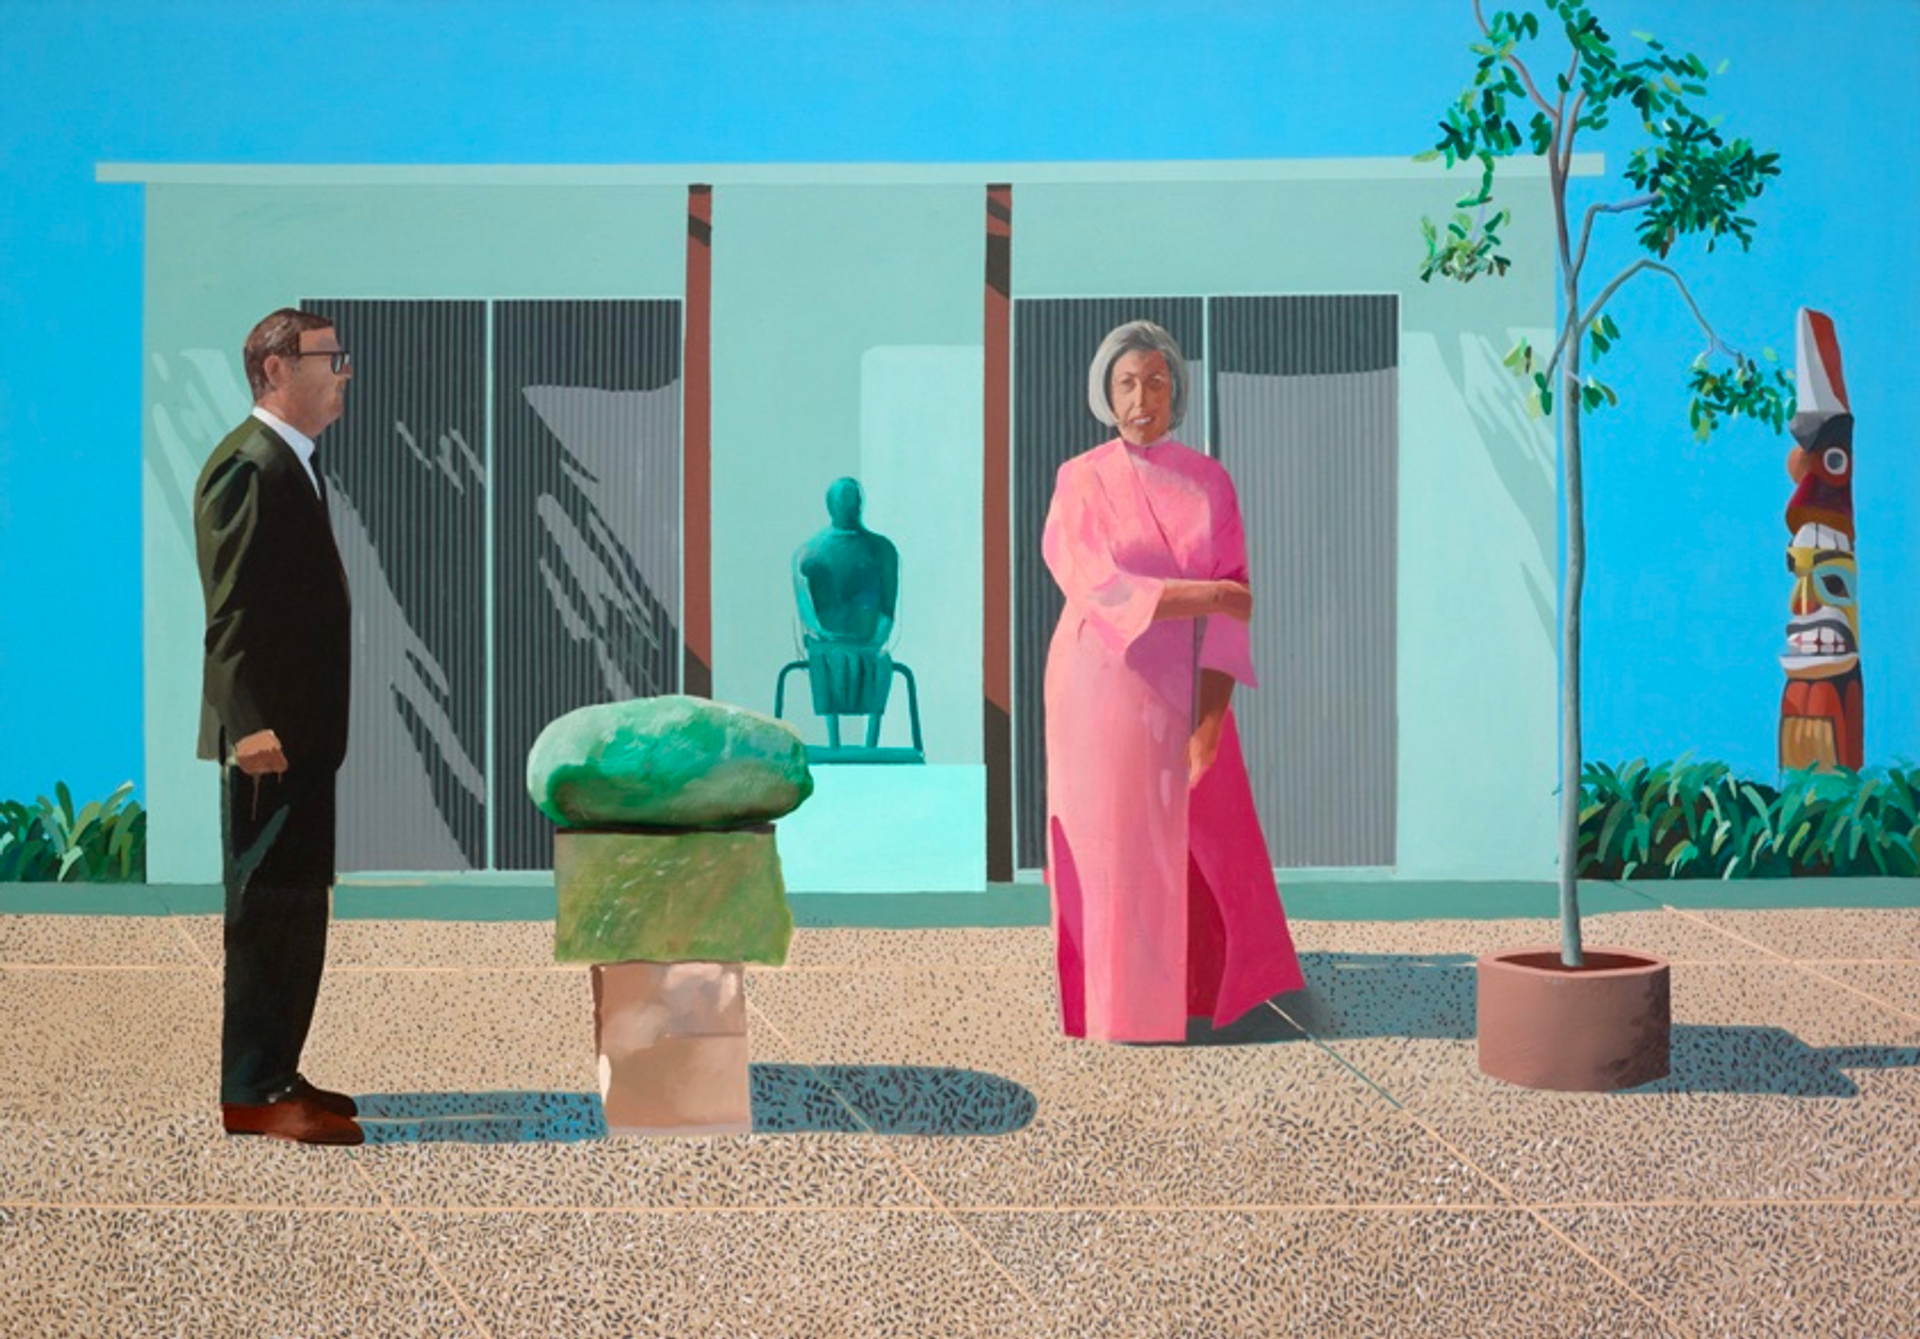 A man in a suit pictured from a side profile looks on at a woman in a pink dress, standing outside an art museum.